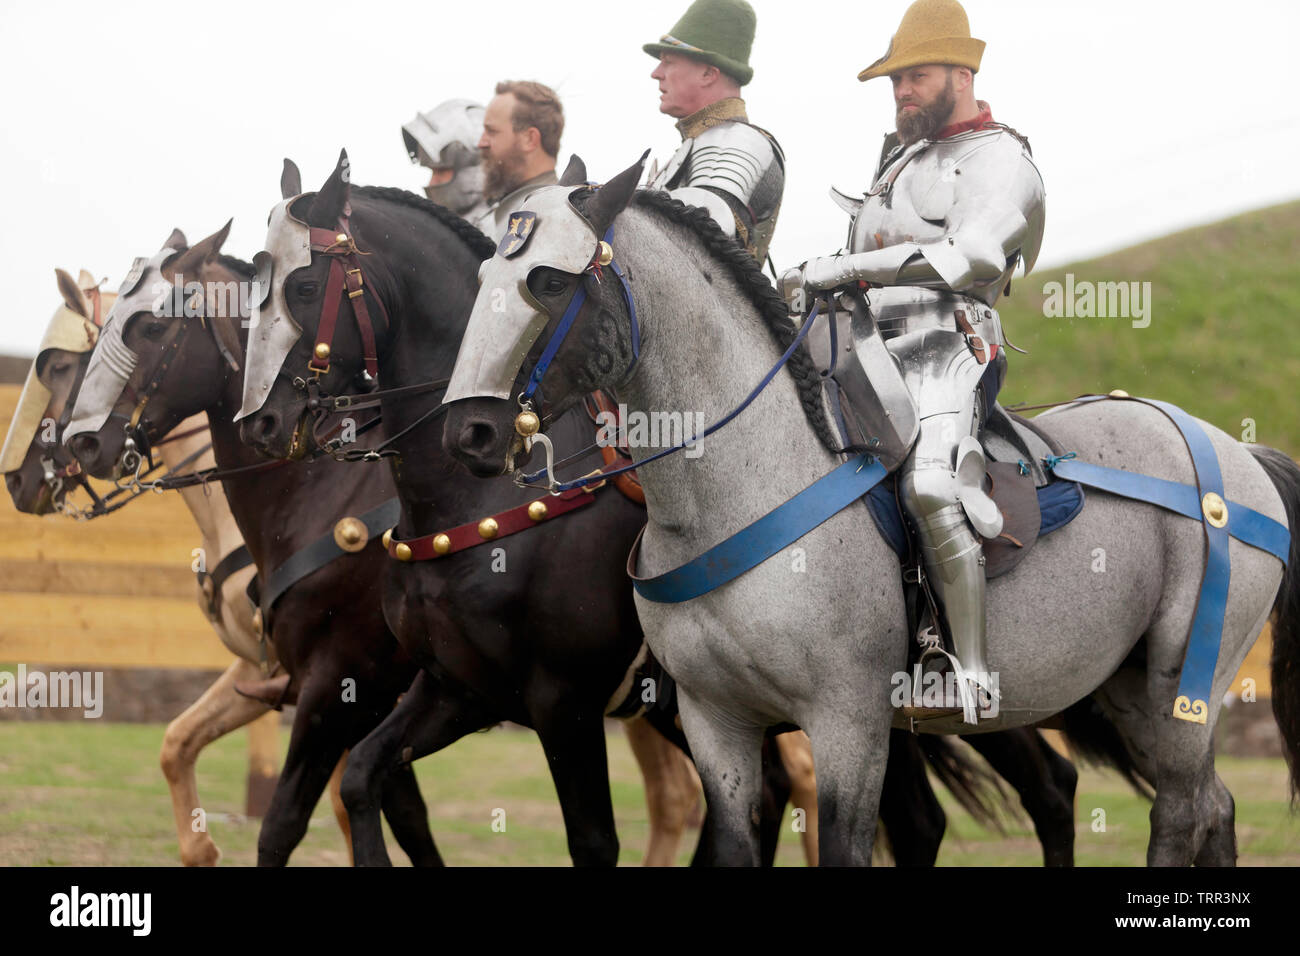 Four Knights in full Armour demonstrating their Horse riding skills, during  an English Heritage Jousting Tournament at Dover Castle, August 201 Stock  Photo - Alamy